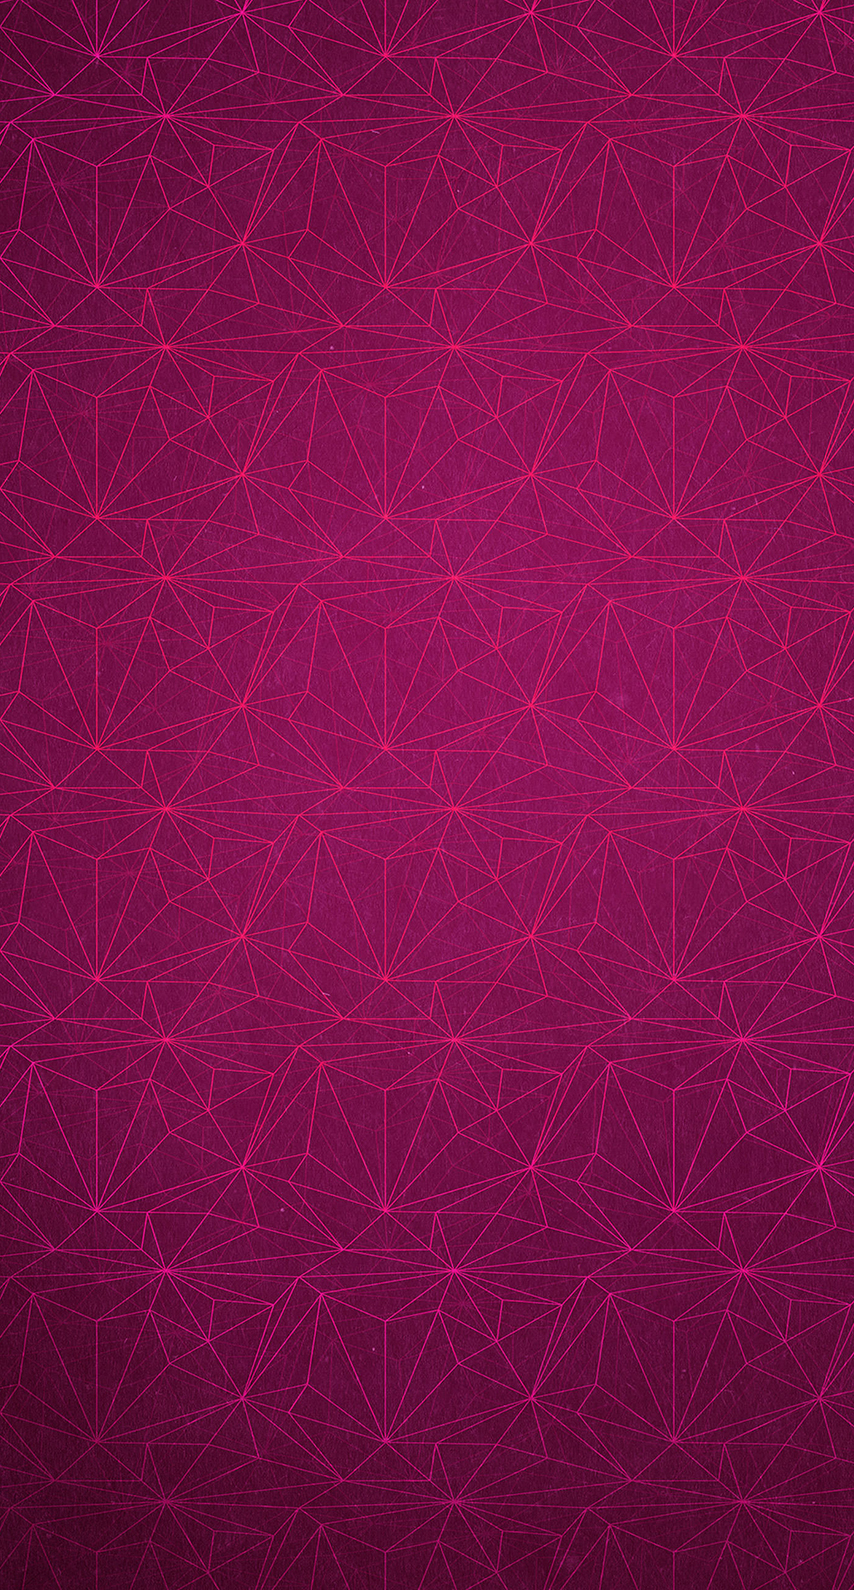 Awesome Wallpaper For IPhone 6s 6 5s 5